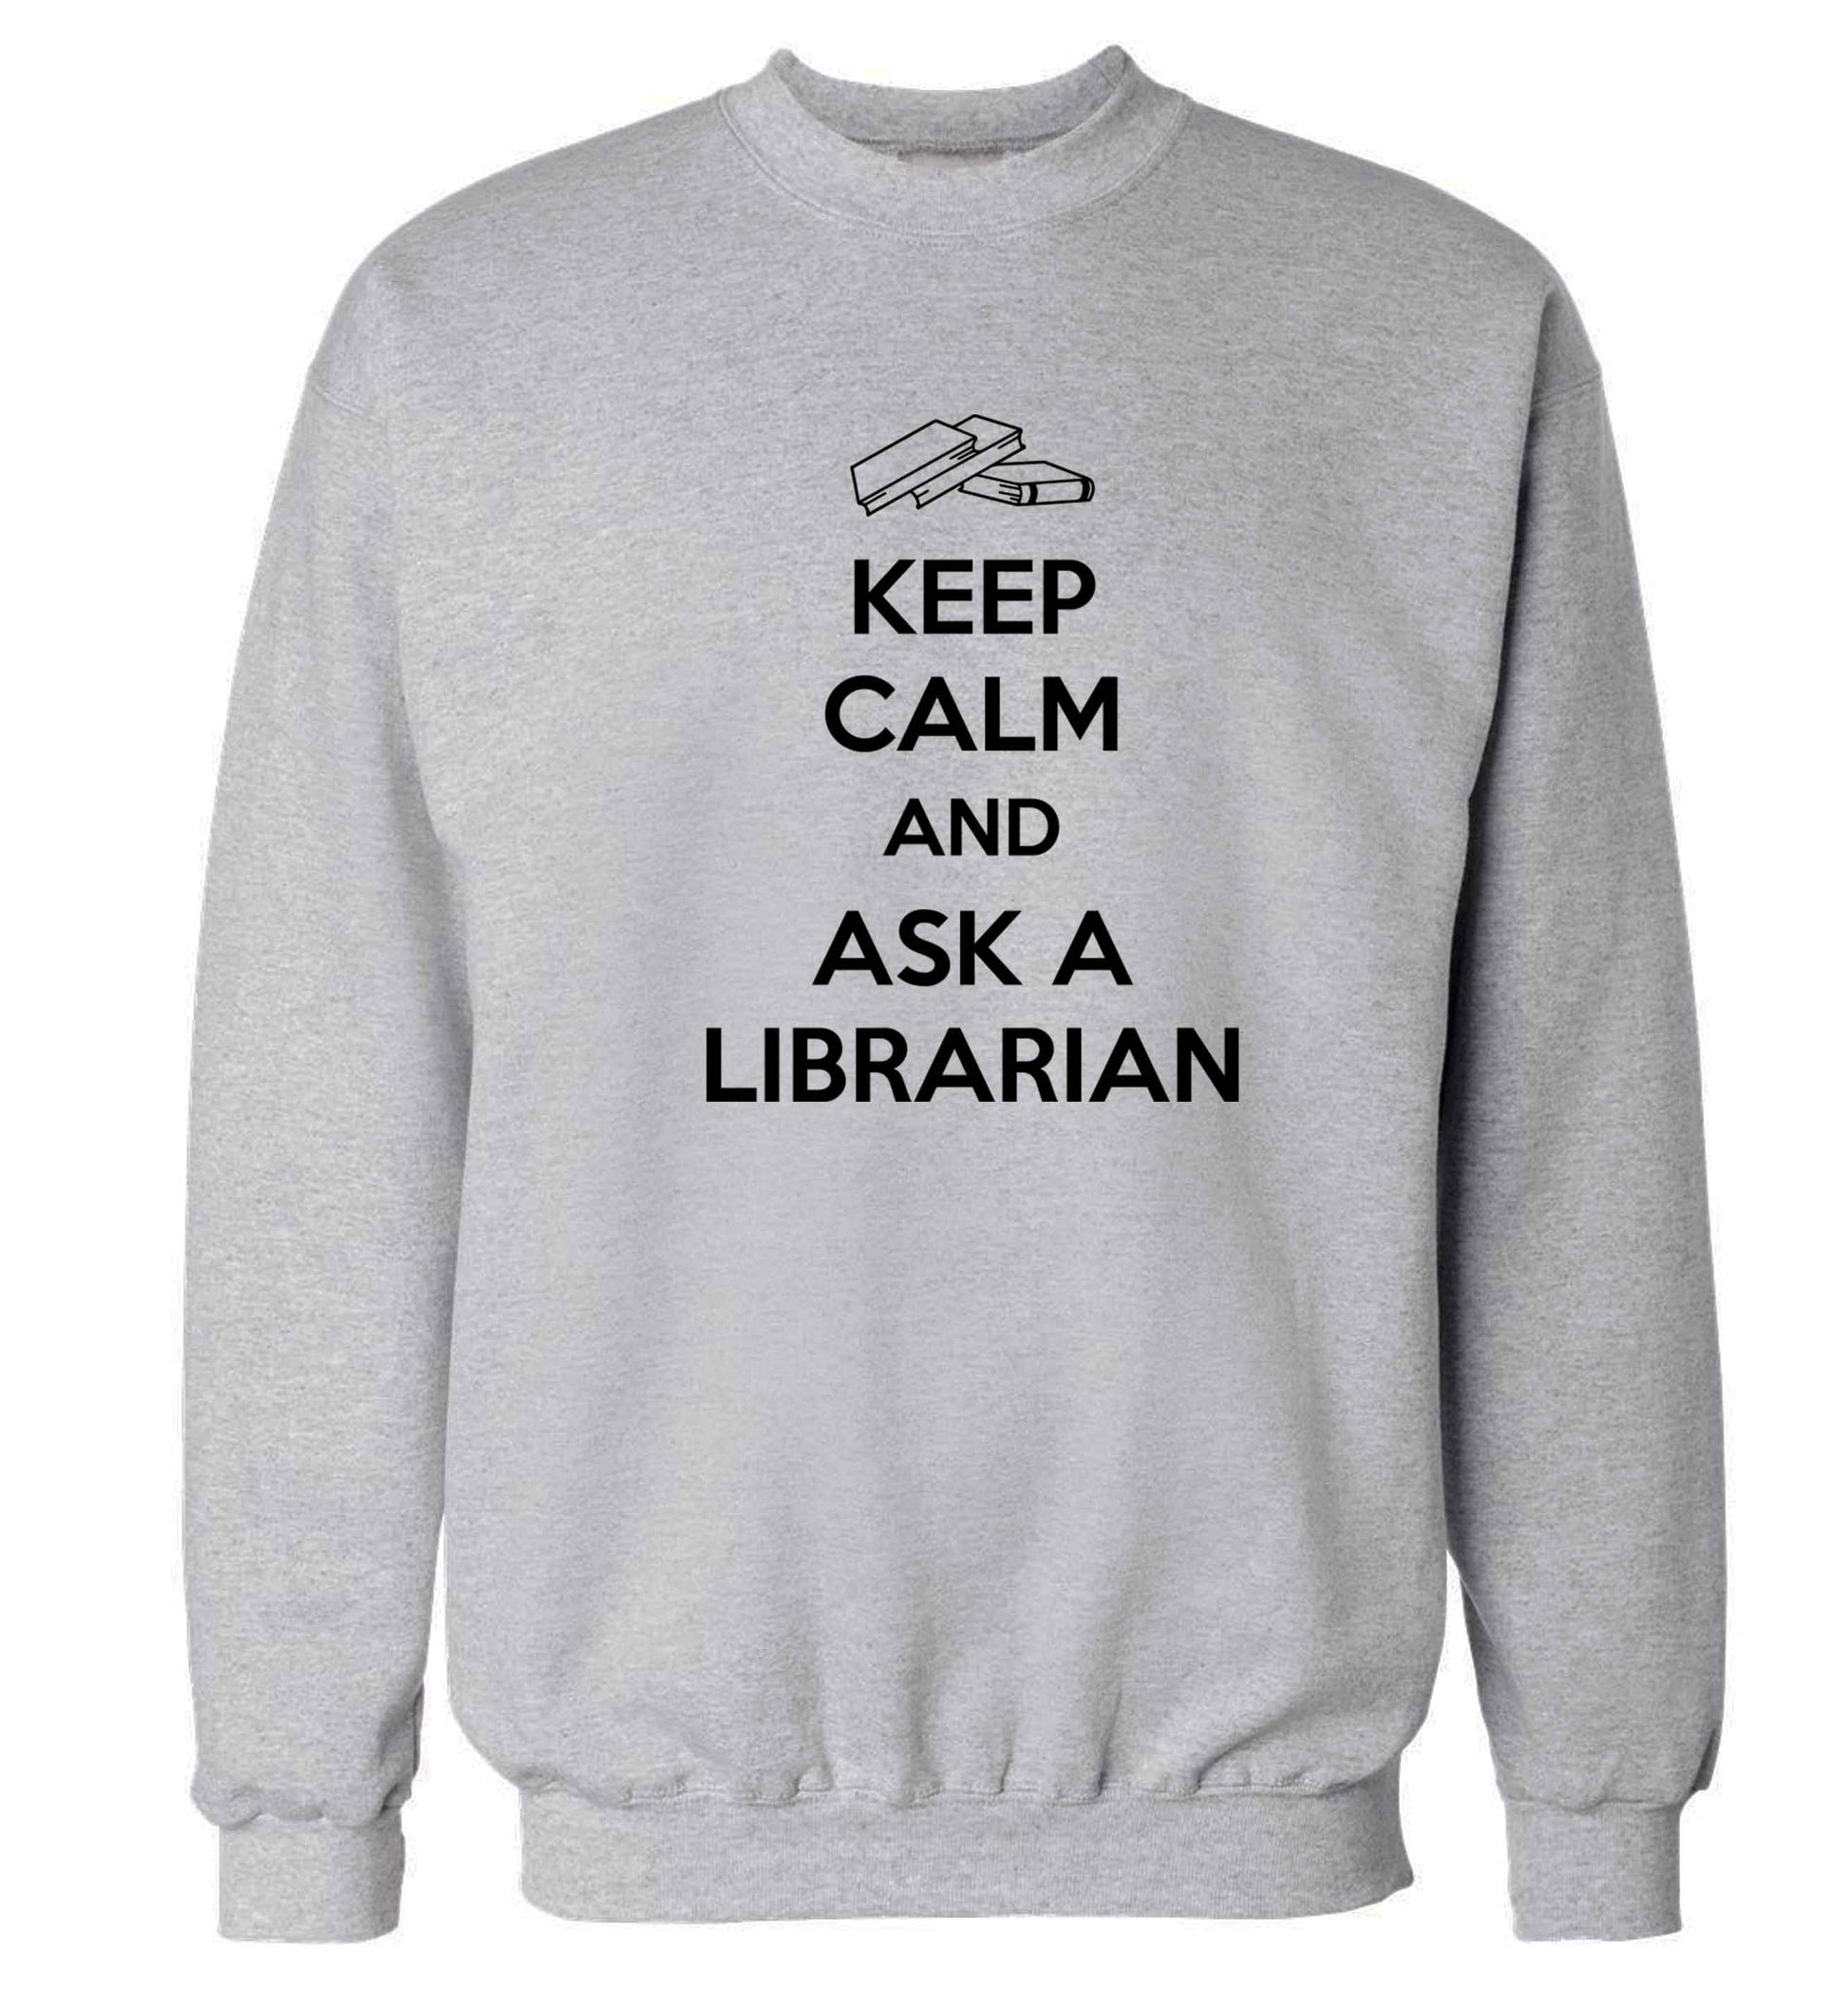 Keep calm and ask a librarian Adult's unisex grey Sweater 2XL